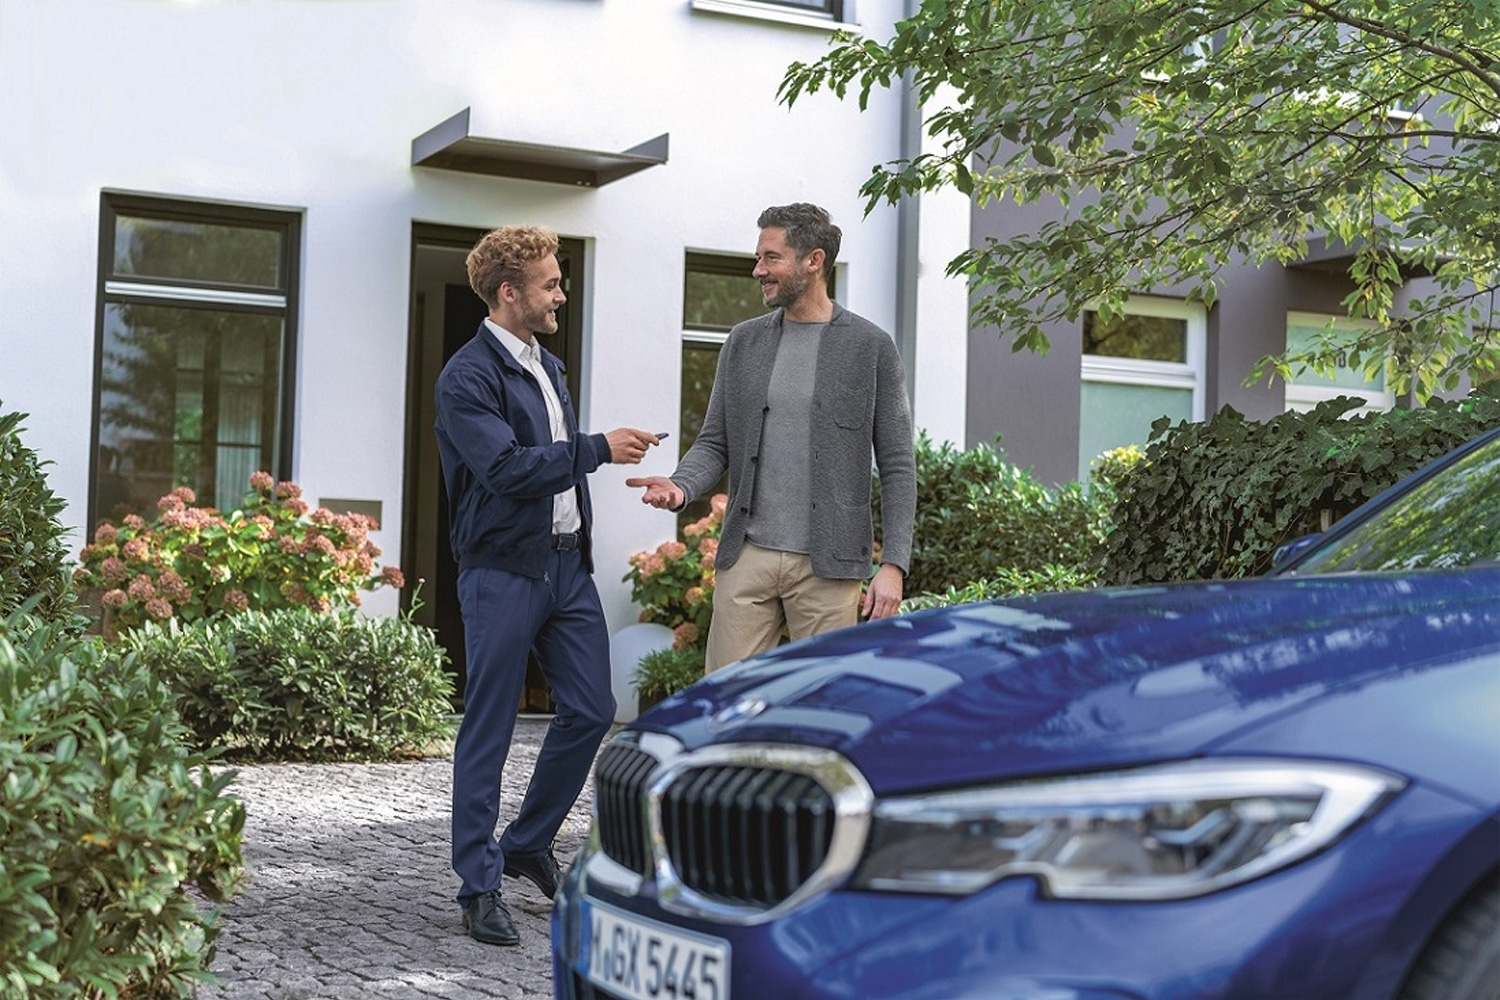 BMW Malaysia Launches Door-to-Door Service in the New Normal